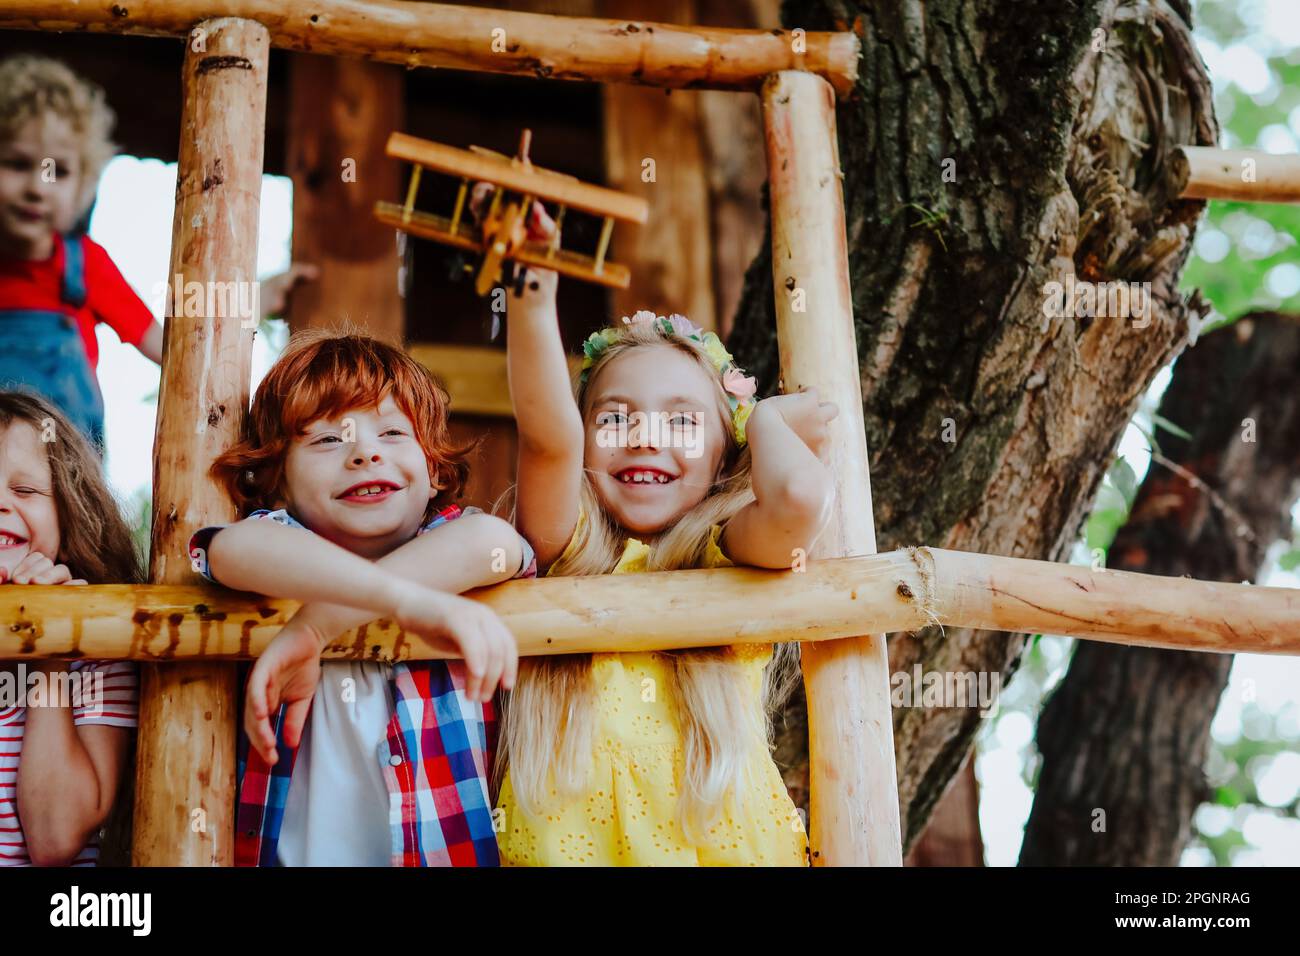 Smiling girl playing with toy airplane by friends on tree house Stock Photo